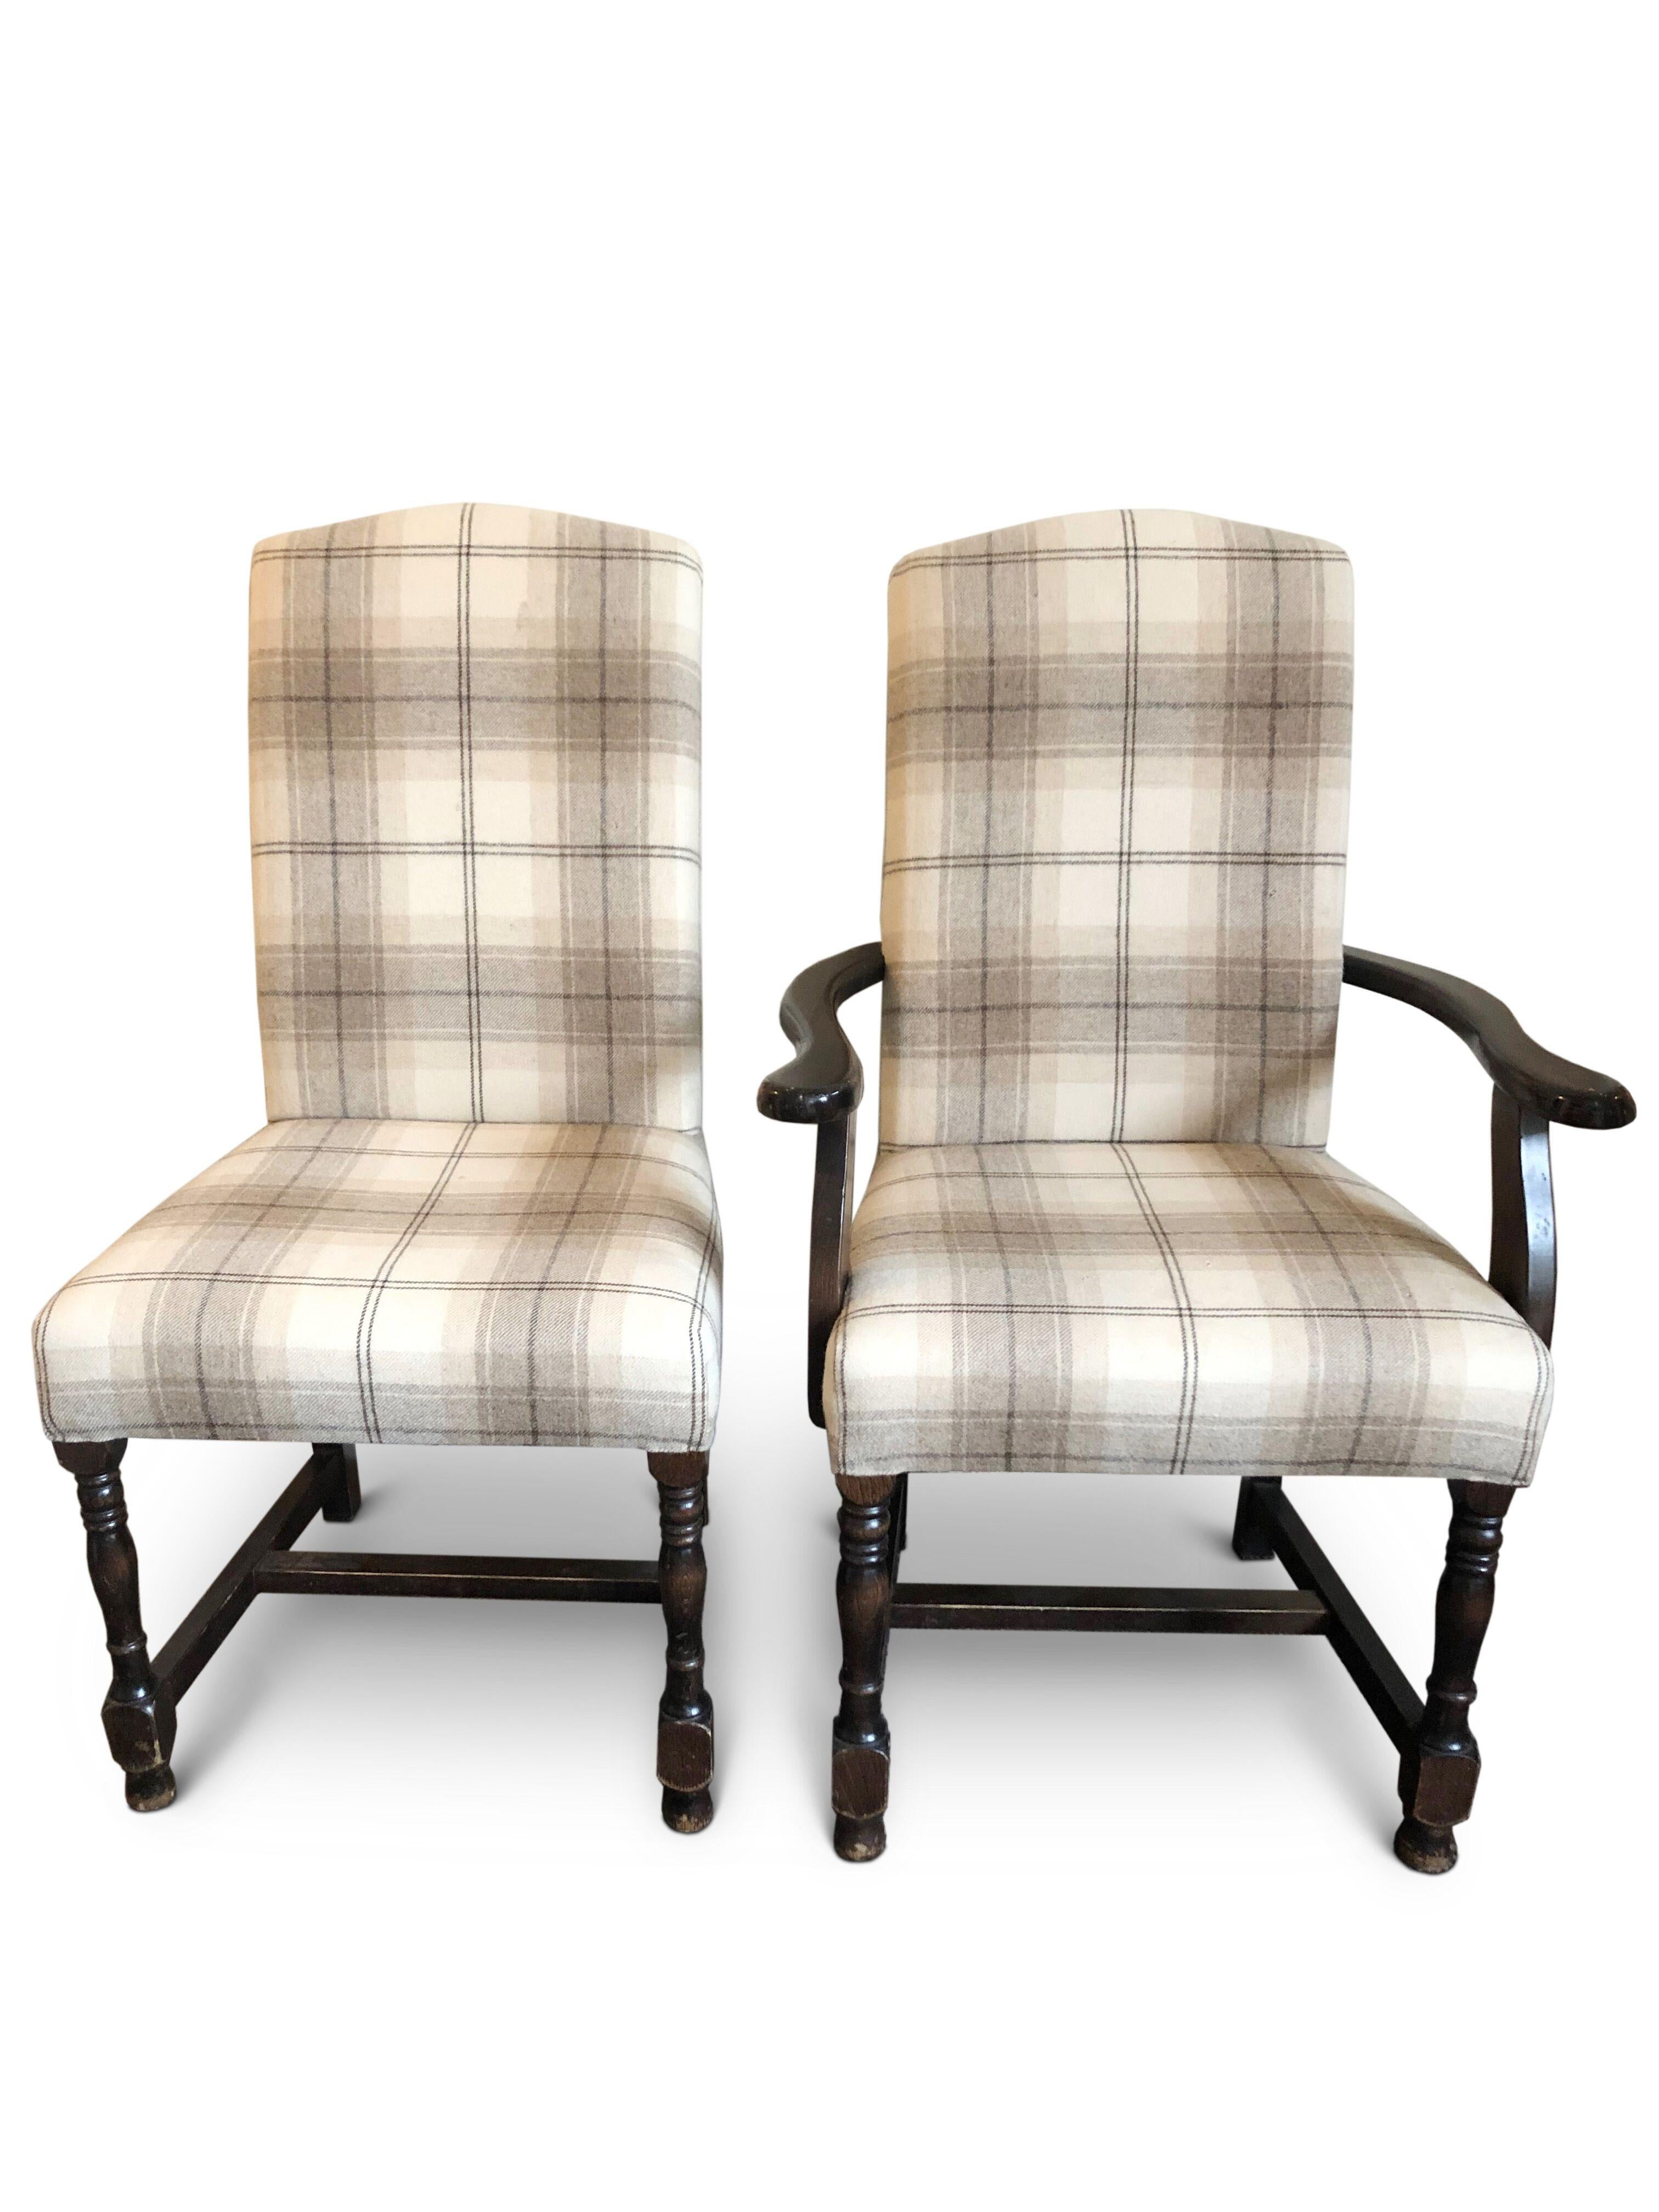 George II Set of 20 Upholstered Camel Back Dining Chairs '12 Singles and 8 Carvers'